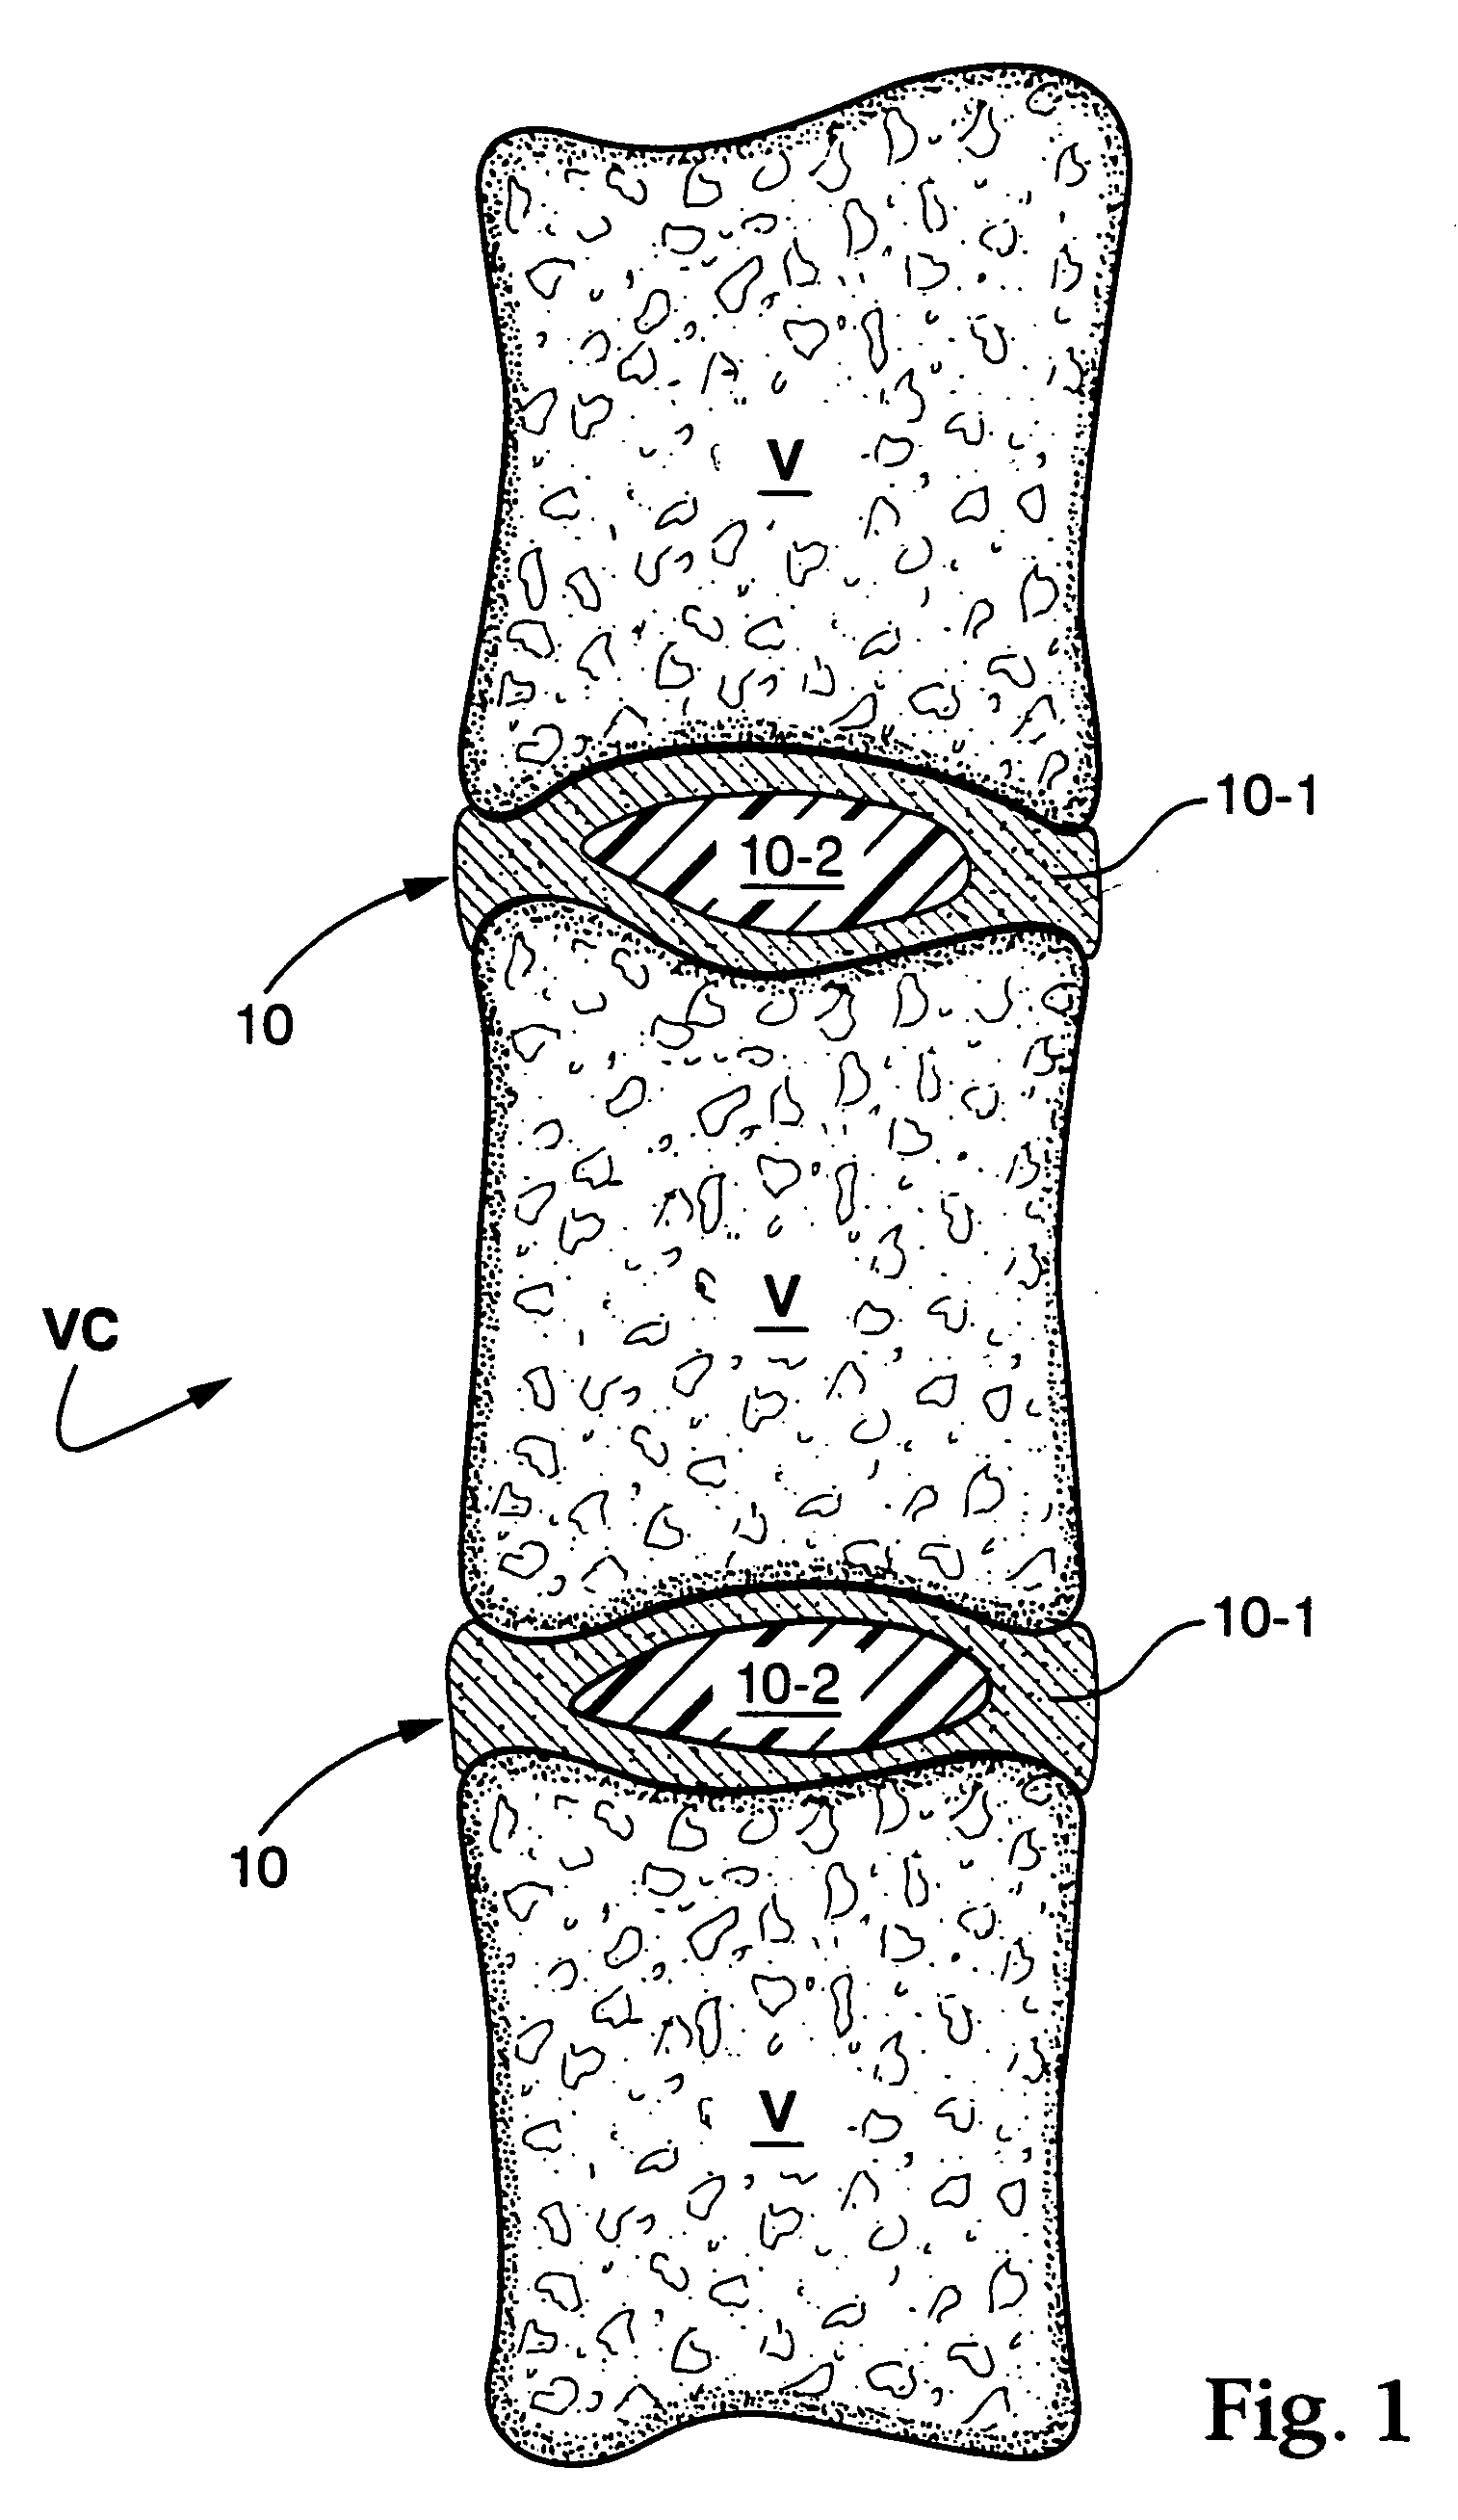 In situ bioprosthetic filler and methods, particularly for the in situ formation of vertebral disc bioprosthetics